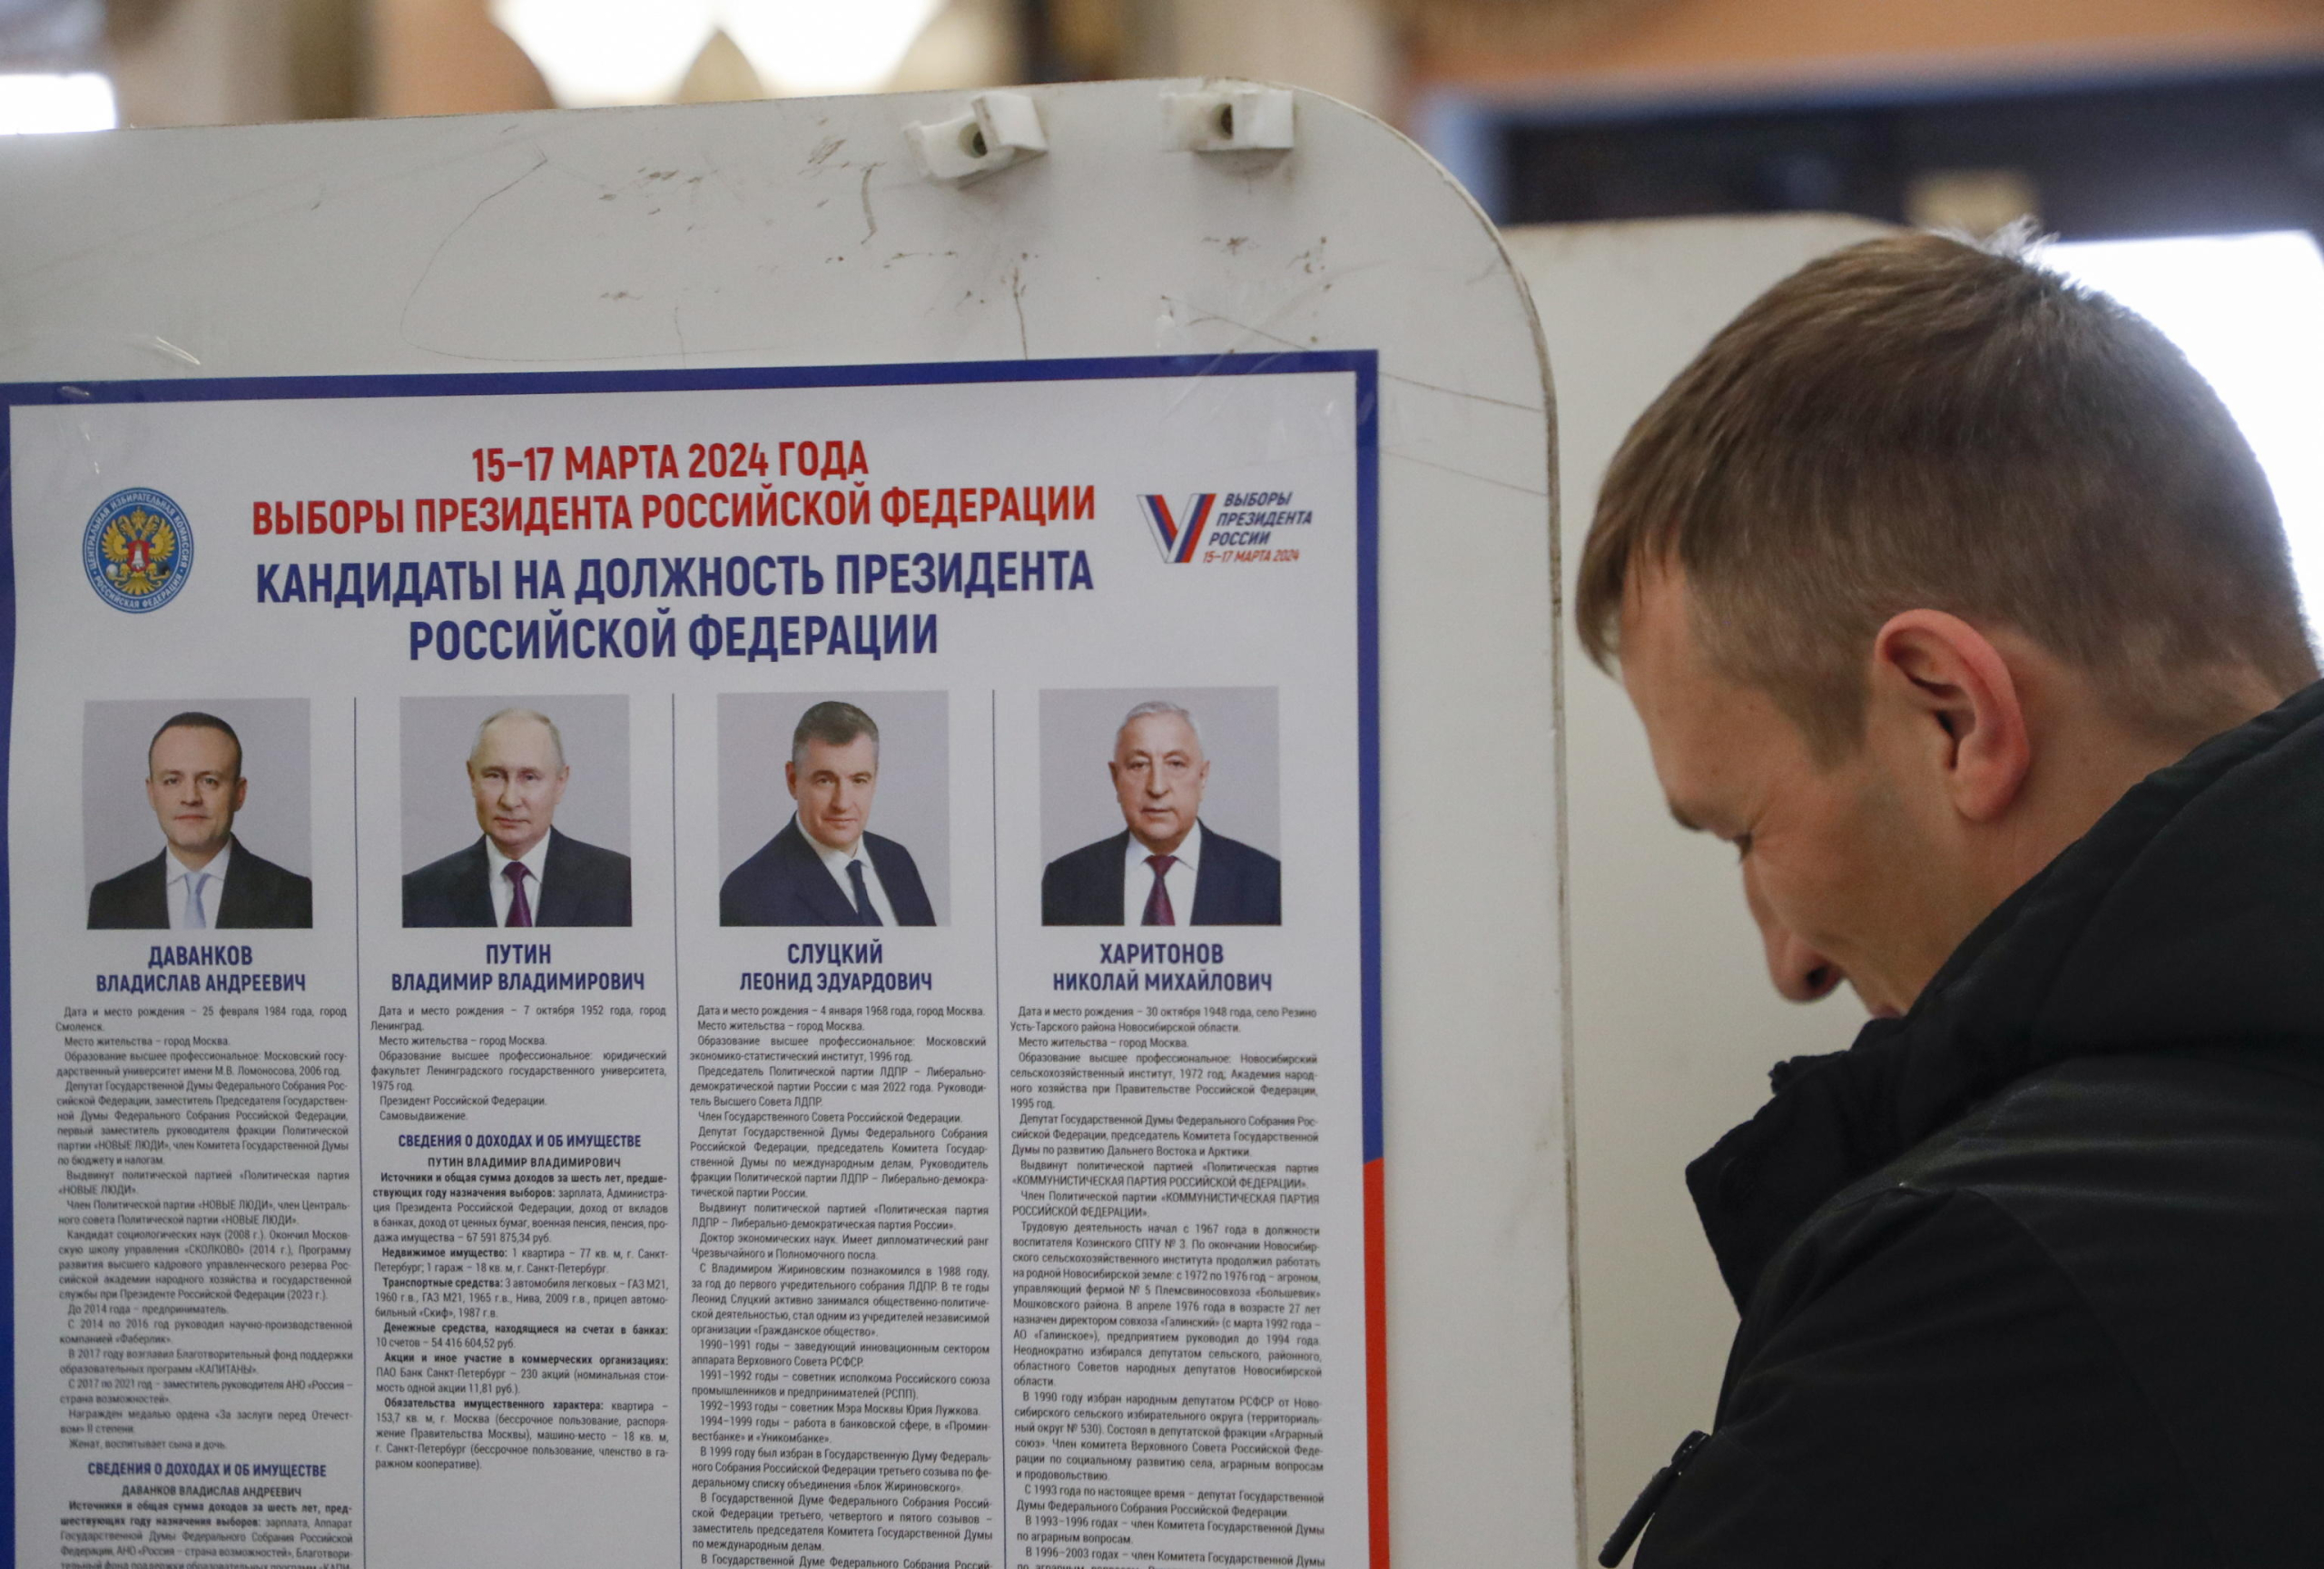 epa11221731 A Russian man examines an information poster with pictures of the candidates for Russian presidential elections during presidential elections in Moscow, Russia, 15 March 2024. The Federation Council has scheduled presidential elections for 17 March 2024. Voting will last three days, from 15 to 17 March. Four candidates registered by the Central Election Commission of the Russian Federation are vying for the post of head of state: Leonid Slutsky, Nikolai Kharitonov, Vladislav Davankov, and Vladimir Putin.  EPA/MAXIM SHIPENKOV